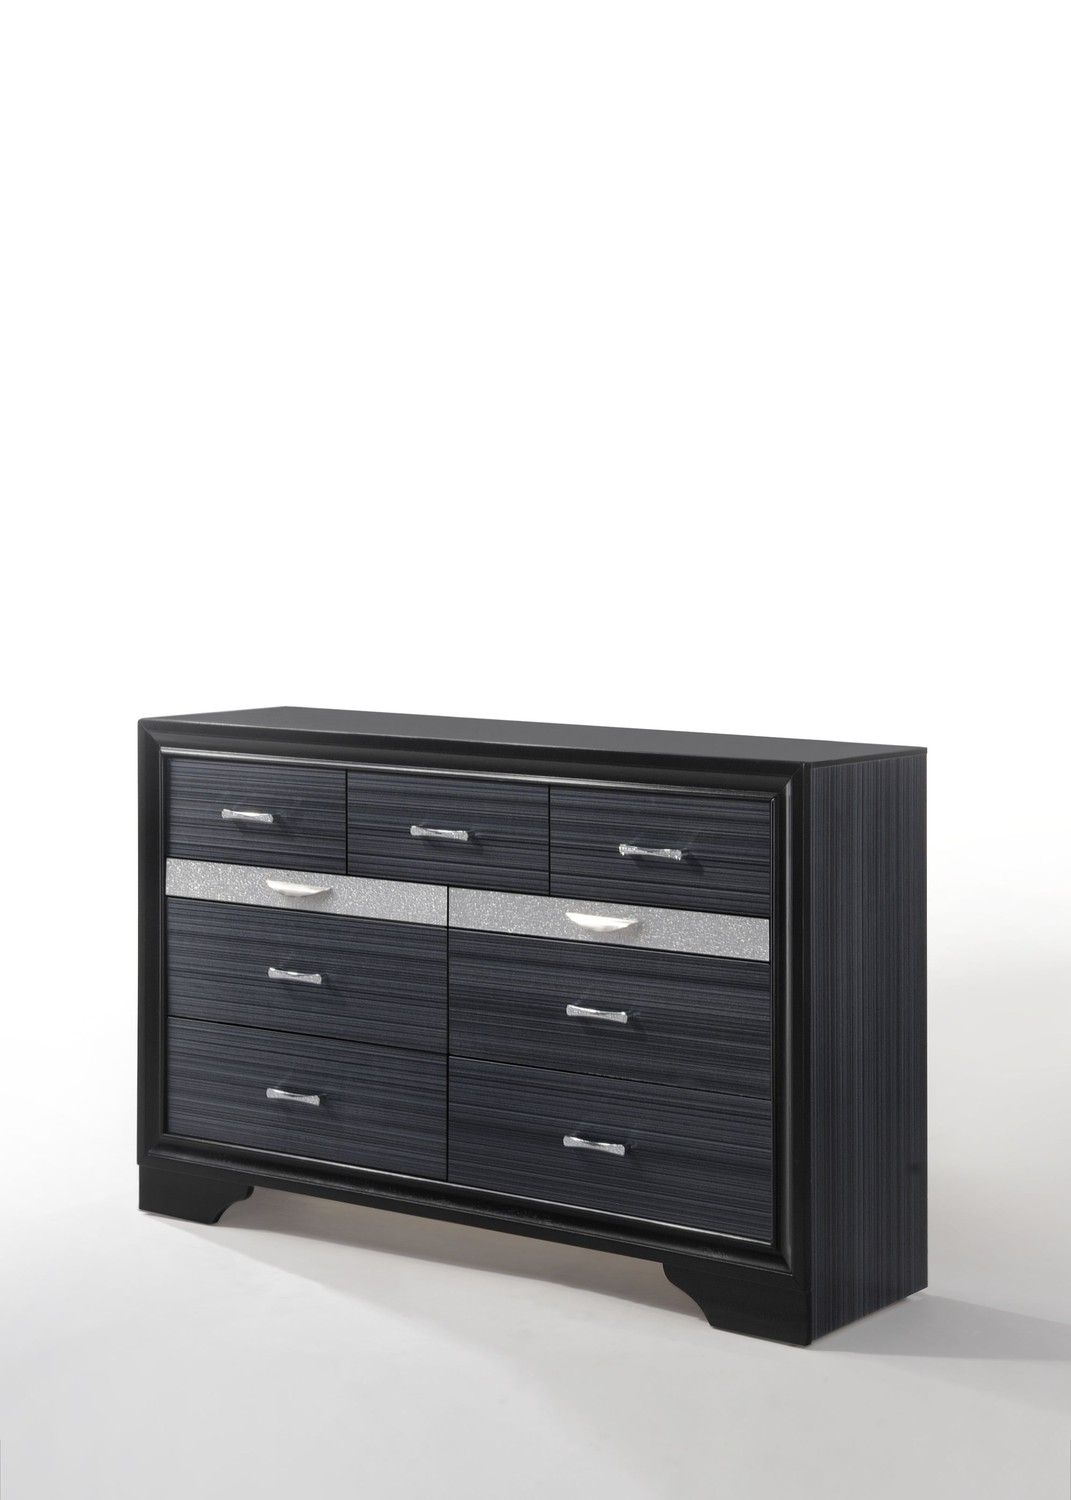 39" Contemporary Black Wood Finish Dresser with 9 Drawers